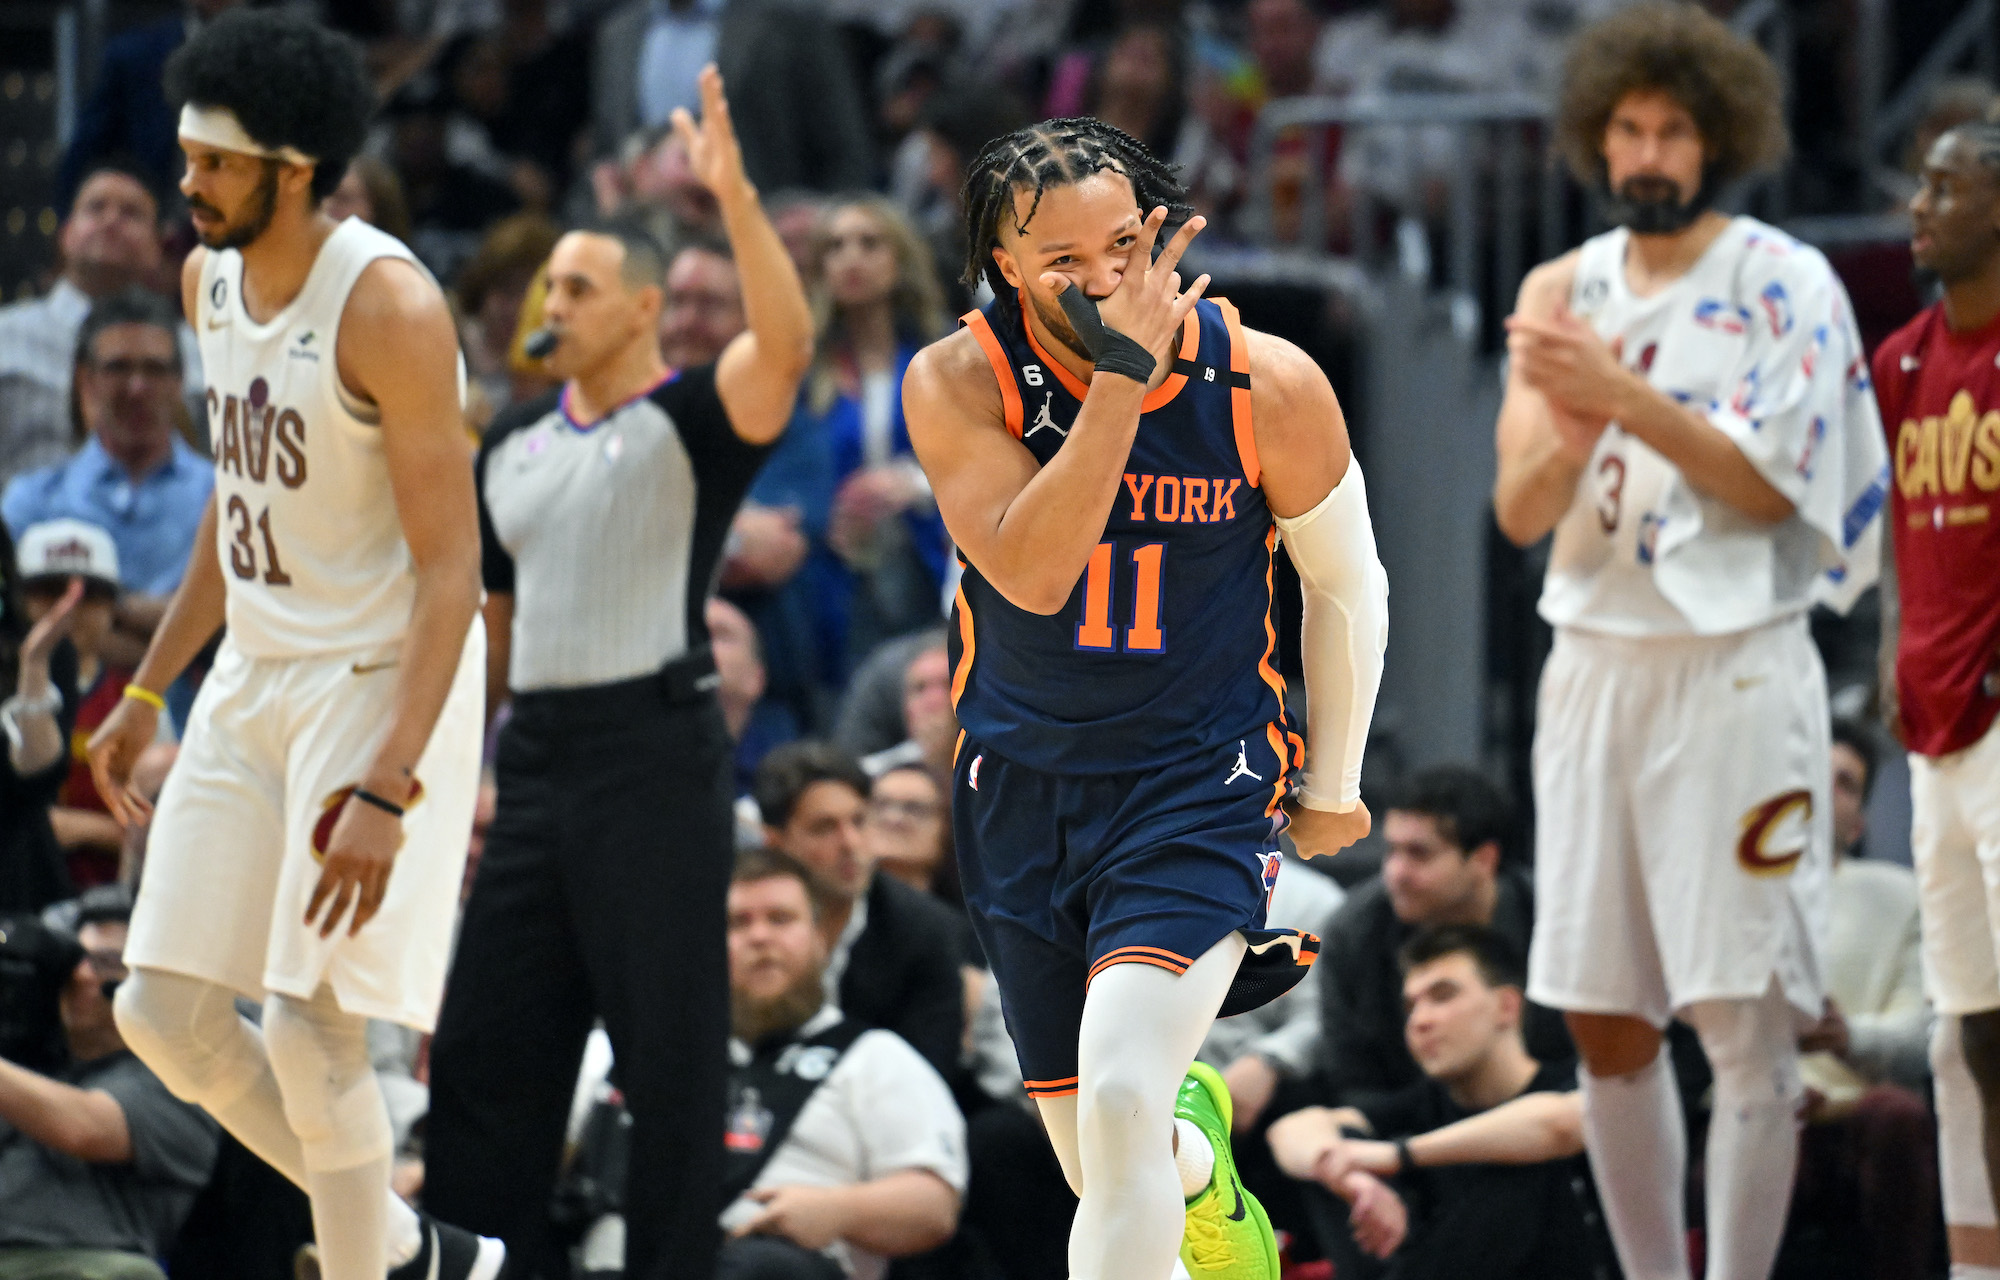 Jalen Brunson #11 of the New York Knicks celebrates after scoring during the fourth quarter of Game One of the Eastern Conference First Round Playoffs against the Cleveland Cavaliers at Rocket Mortgage Fieldhouse